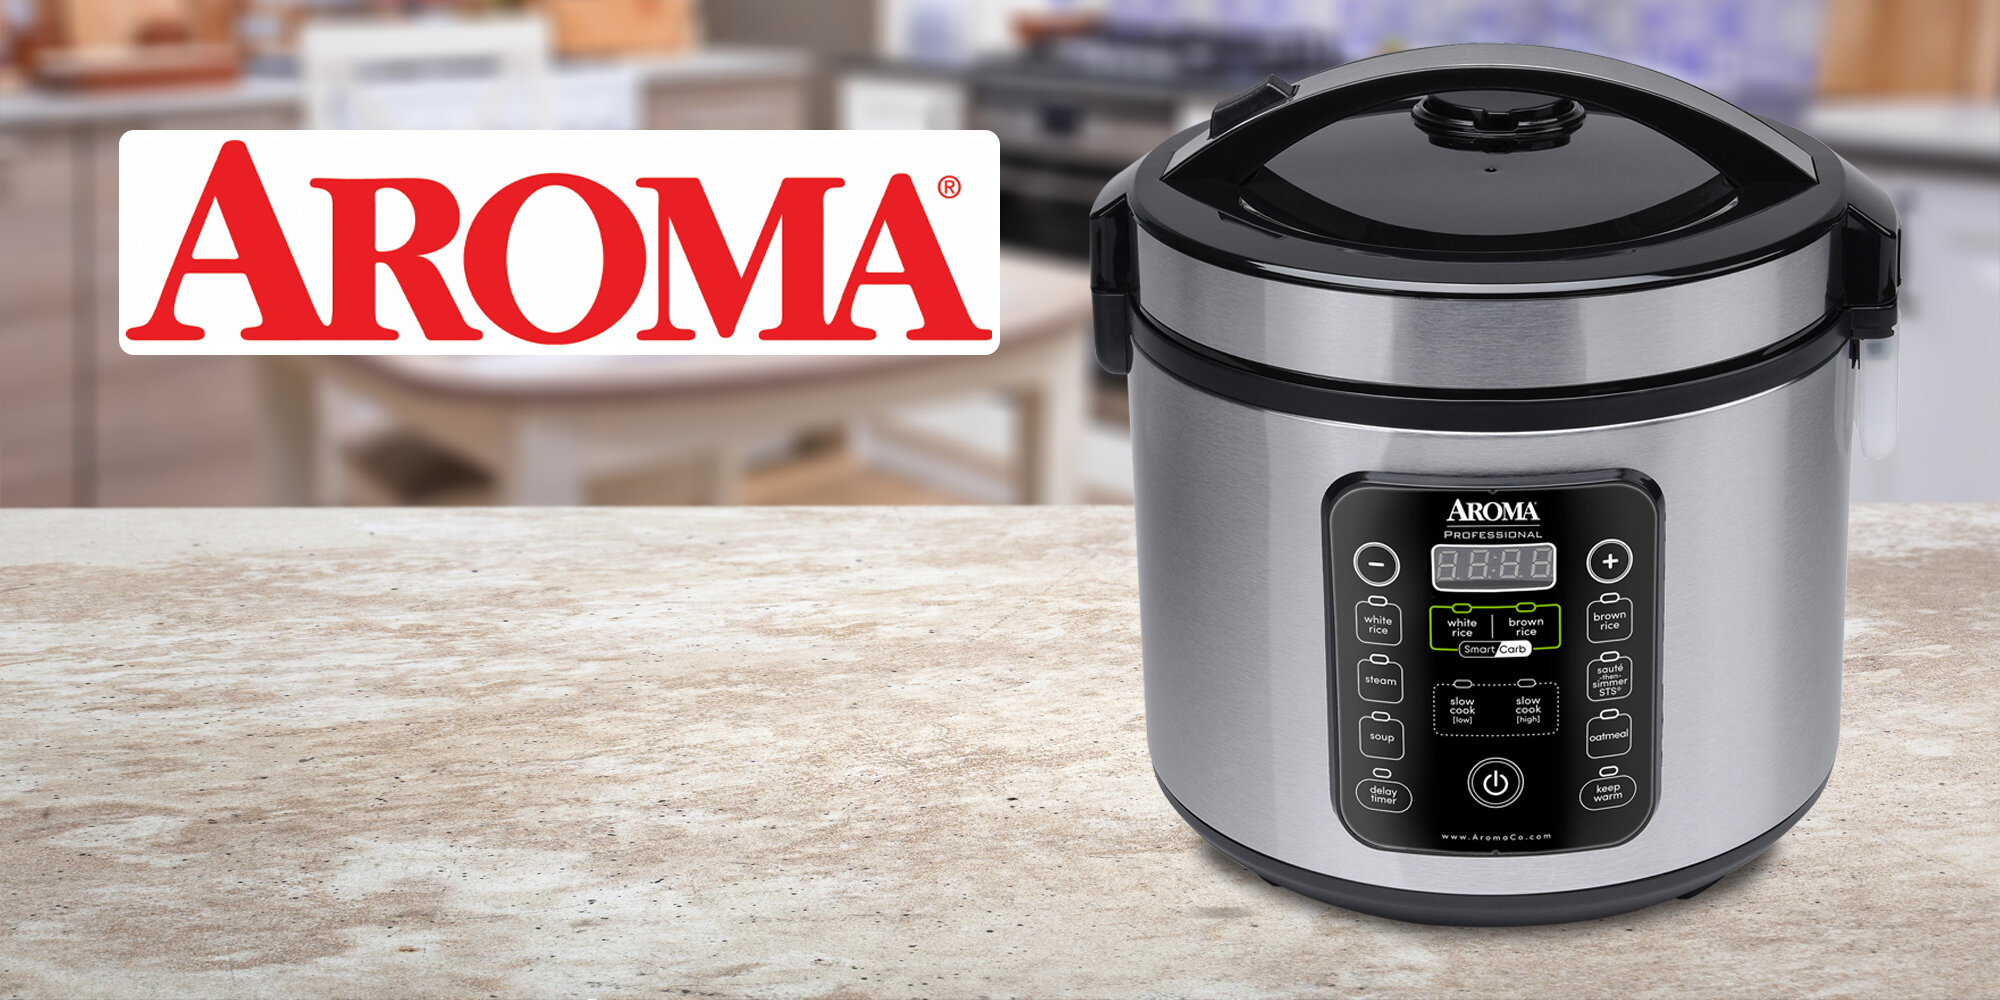 Aroma ARC-1120SBL 20-Cup (Cooked) Smart Carb Rice Cooker ARC